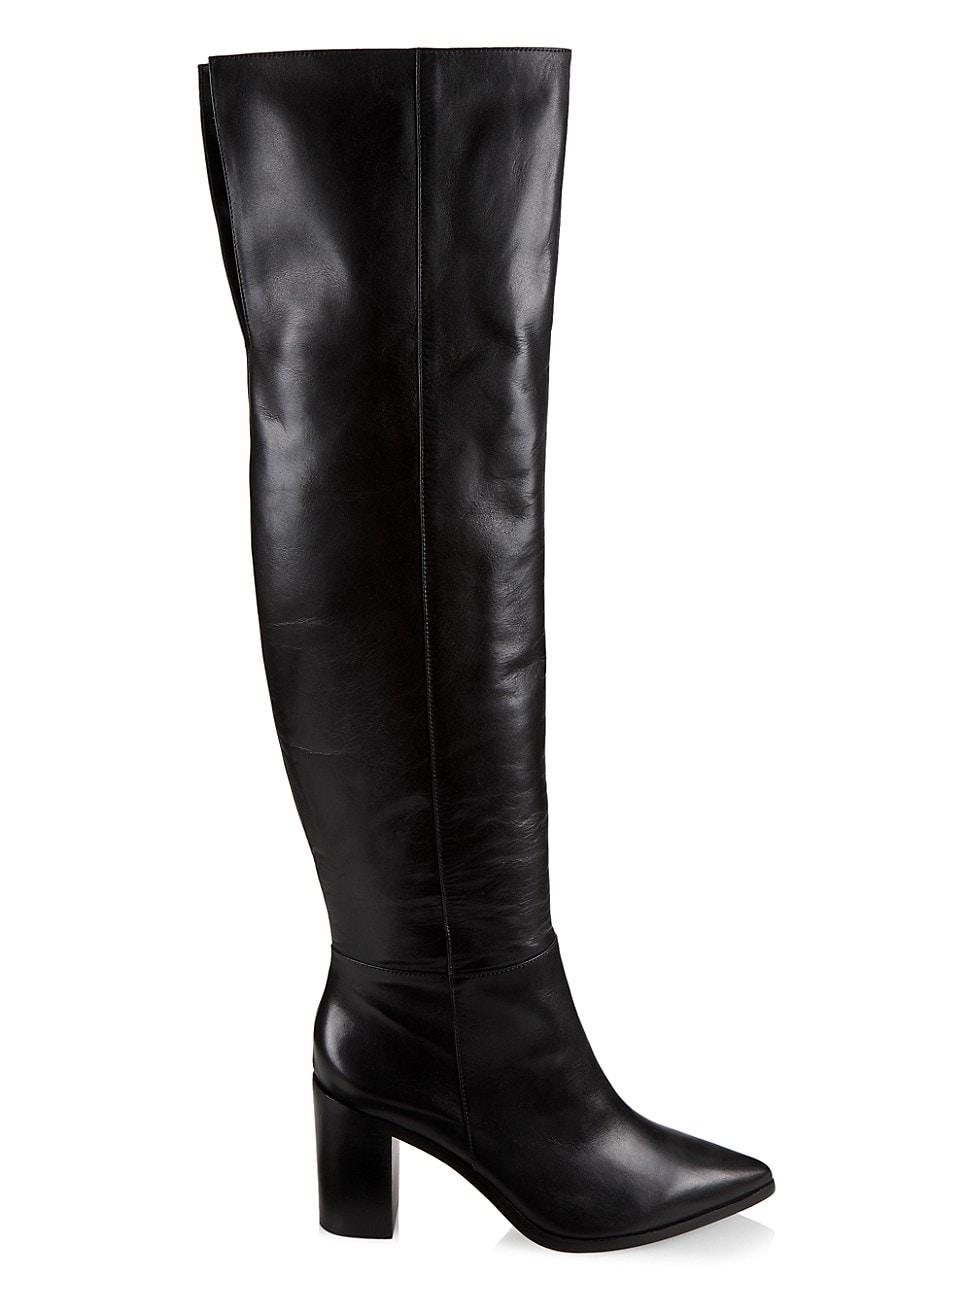 SCHUTZ SHOES Mikki Leather Over-the-knee Boots in Black | Lyst